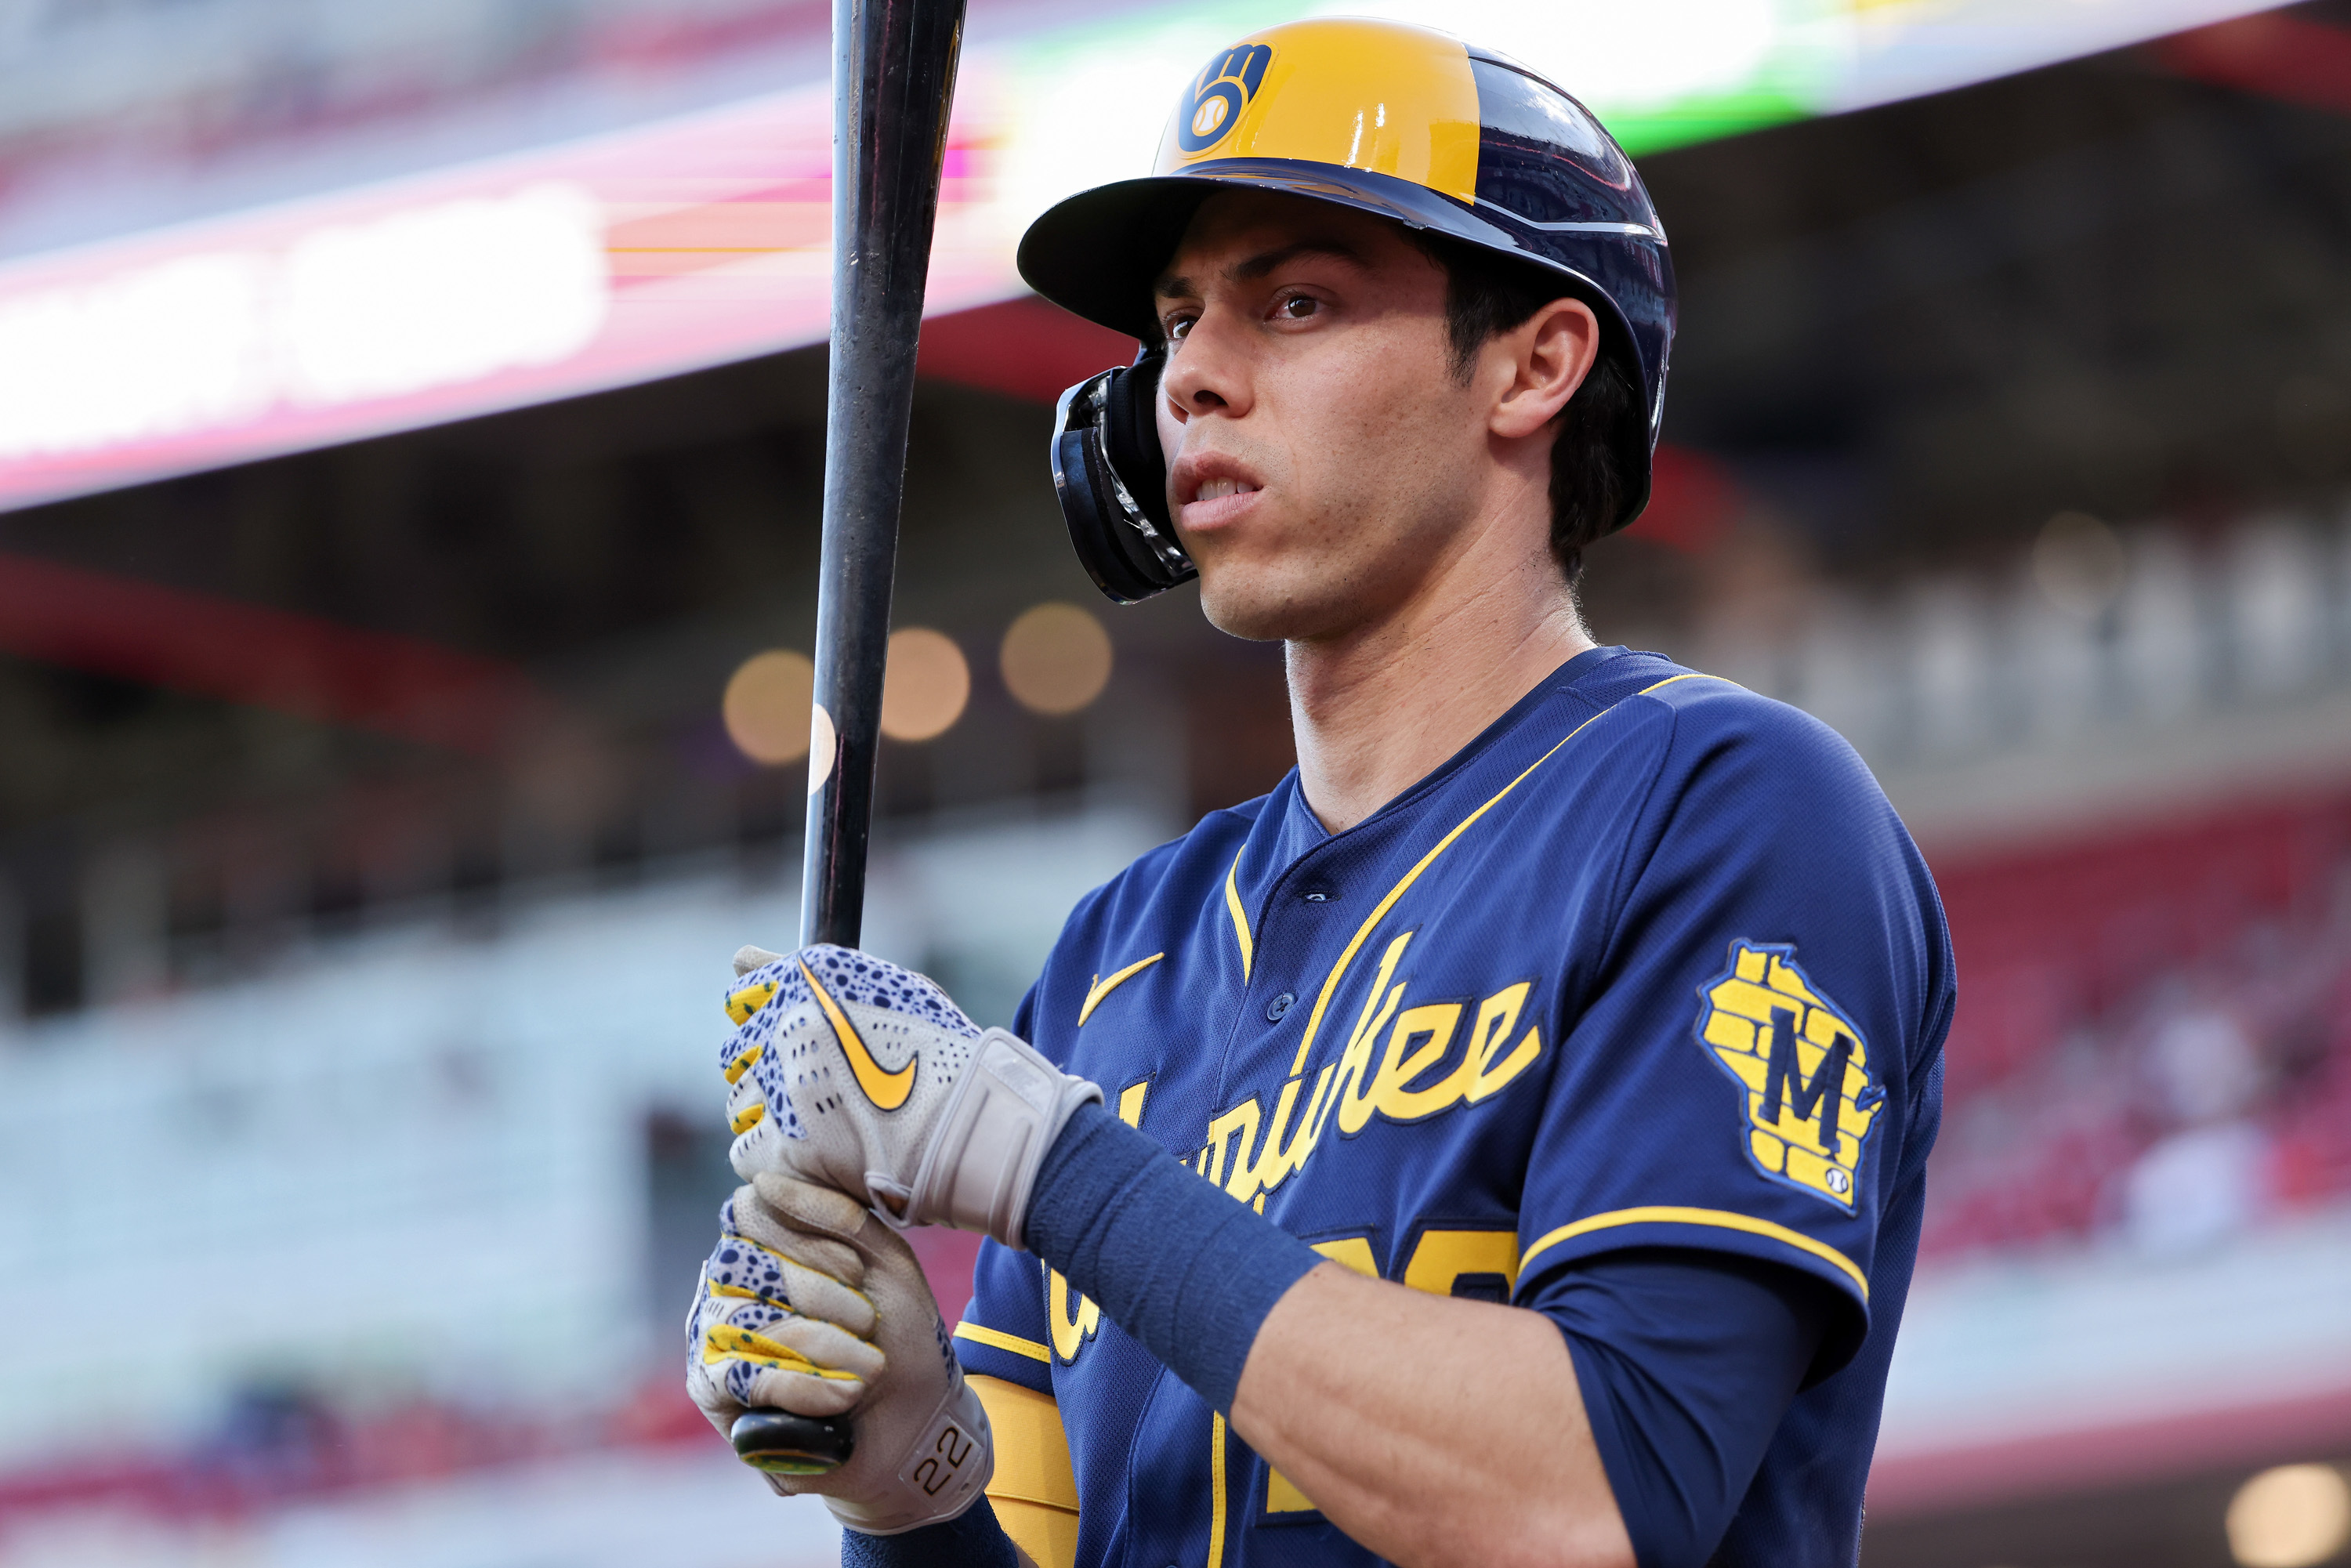 The 2019 season ended prematurely for Christian Yelich, but it was still an  historic one - Brew Crew Ball